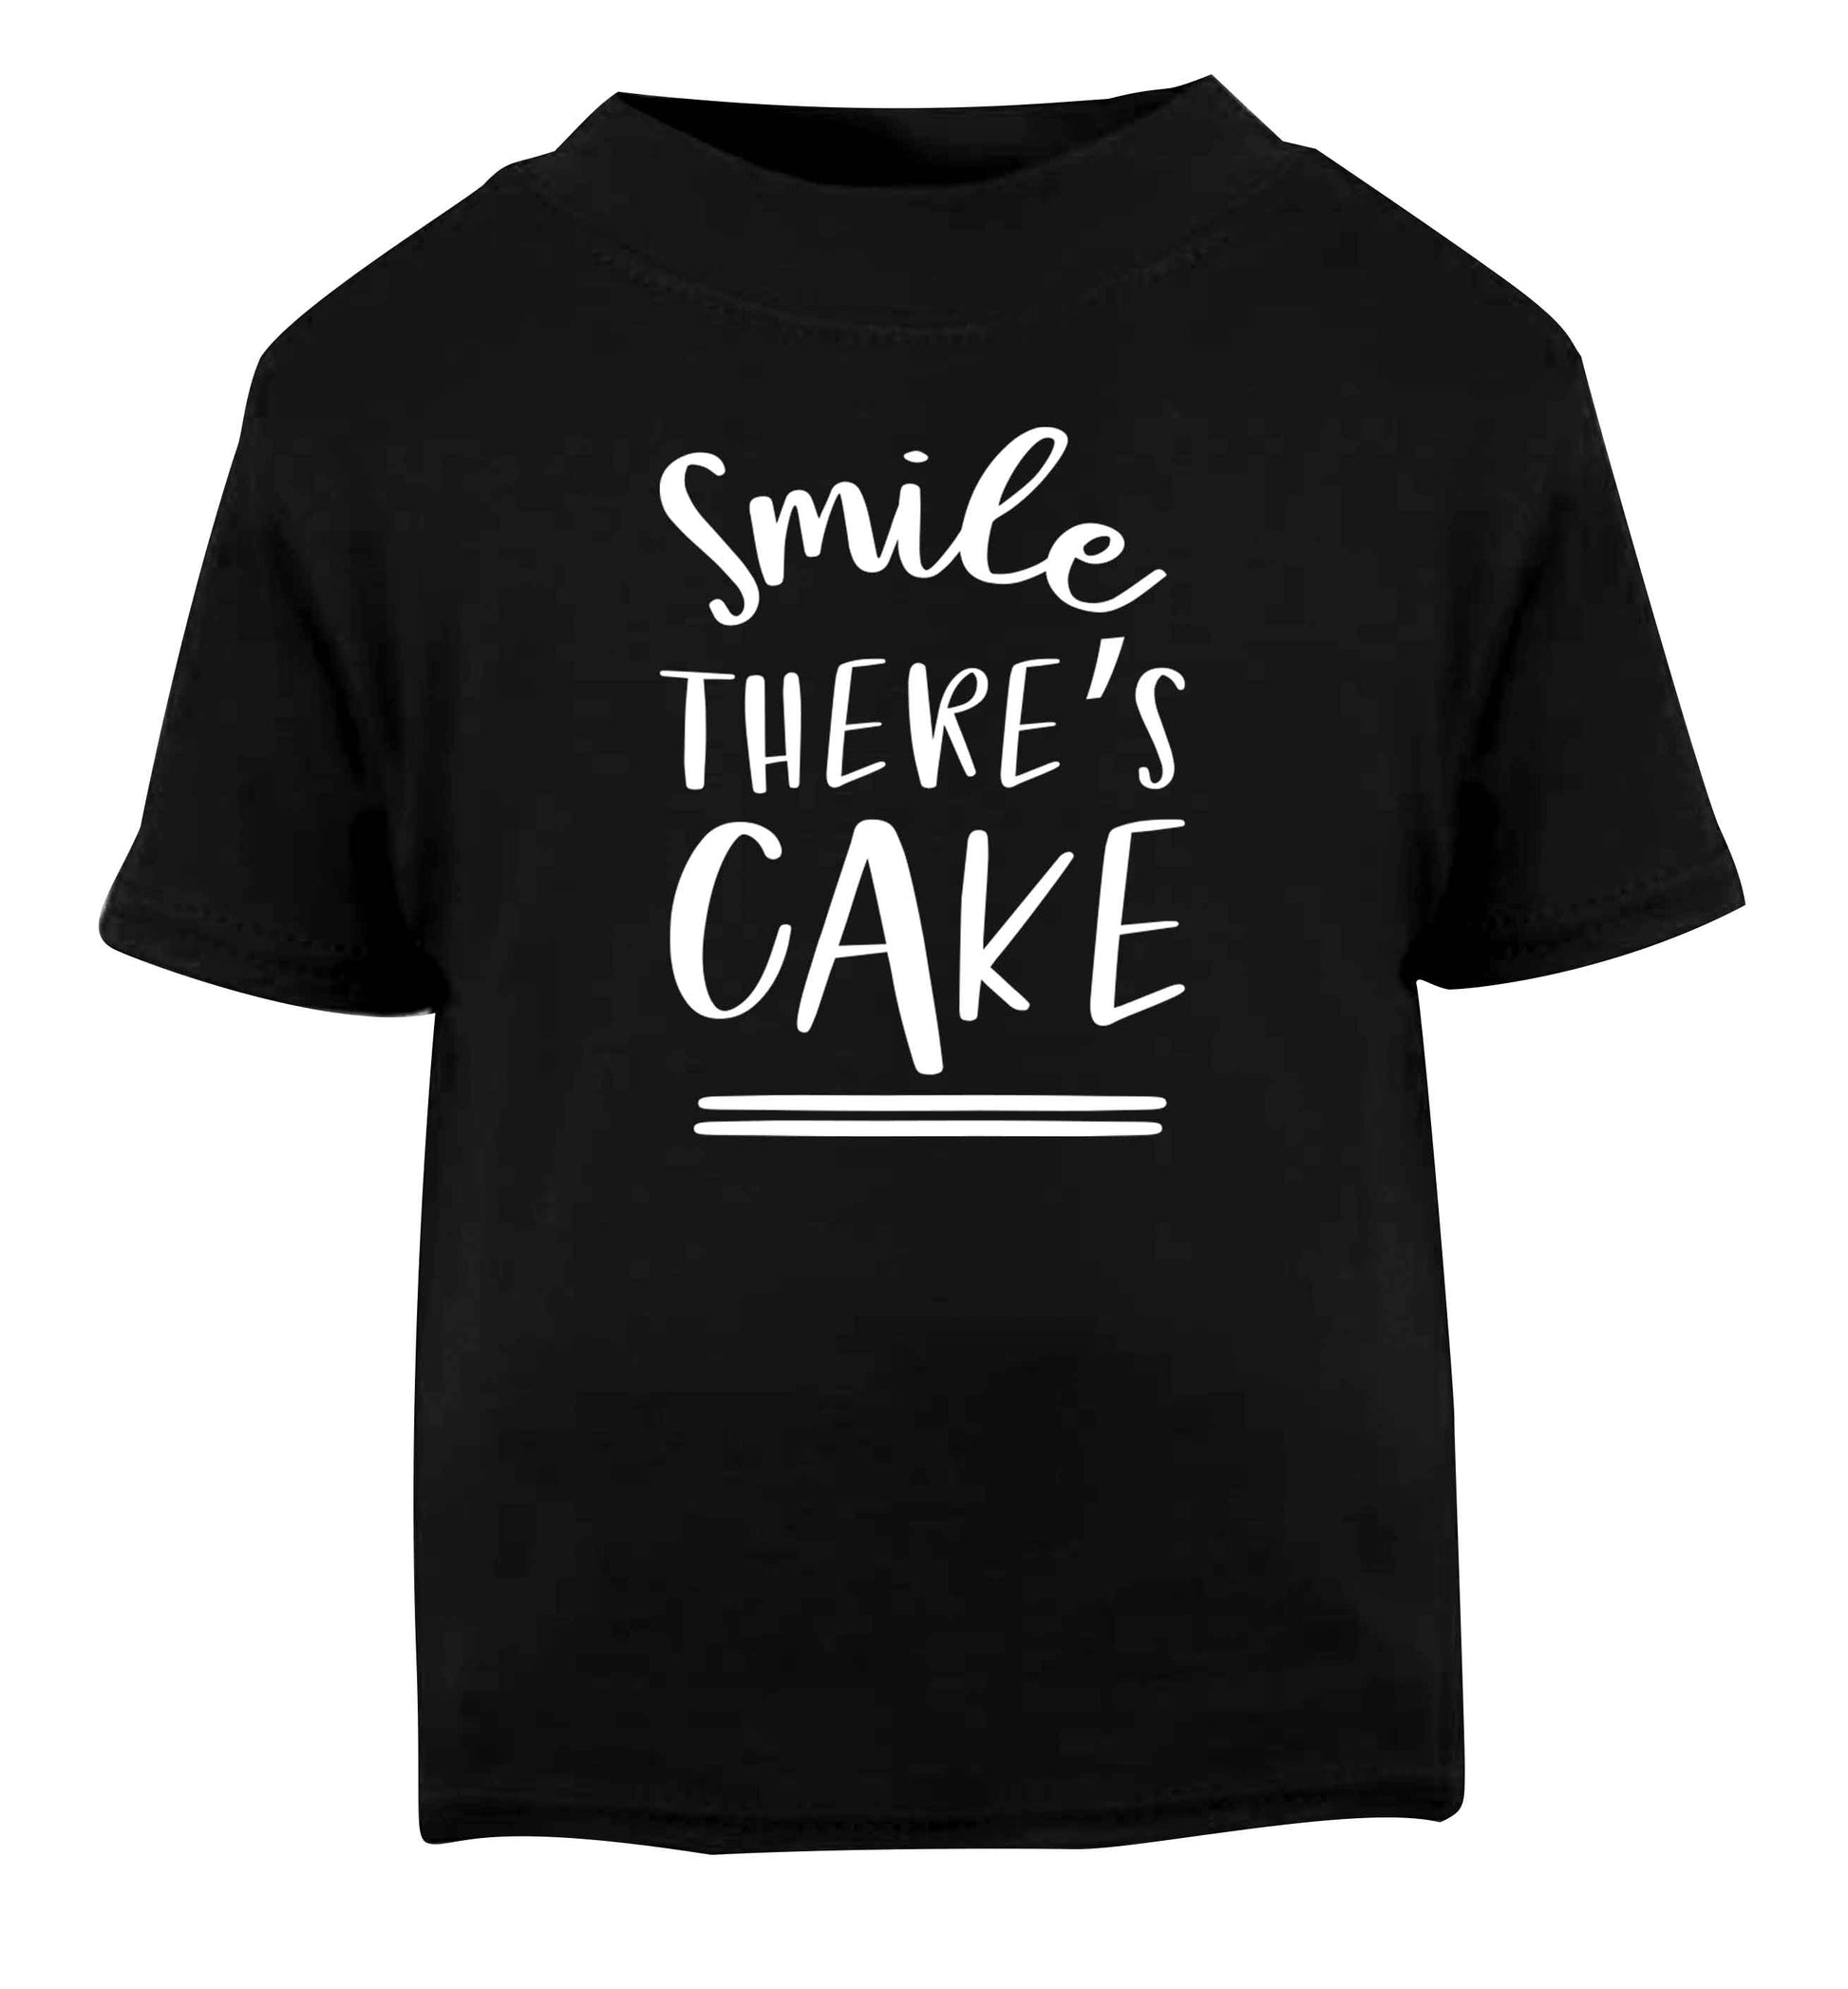 Smile there's cake Black Baby Toddler Tshirt 2 years